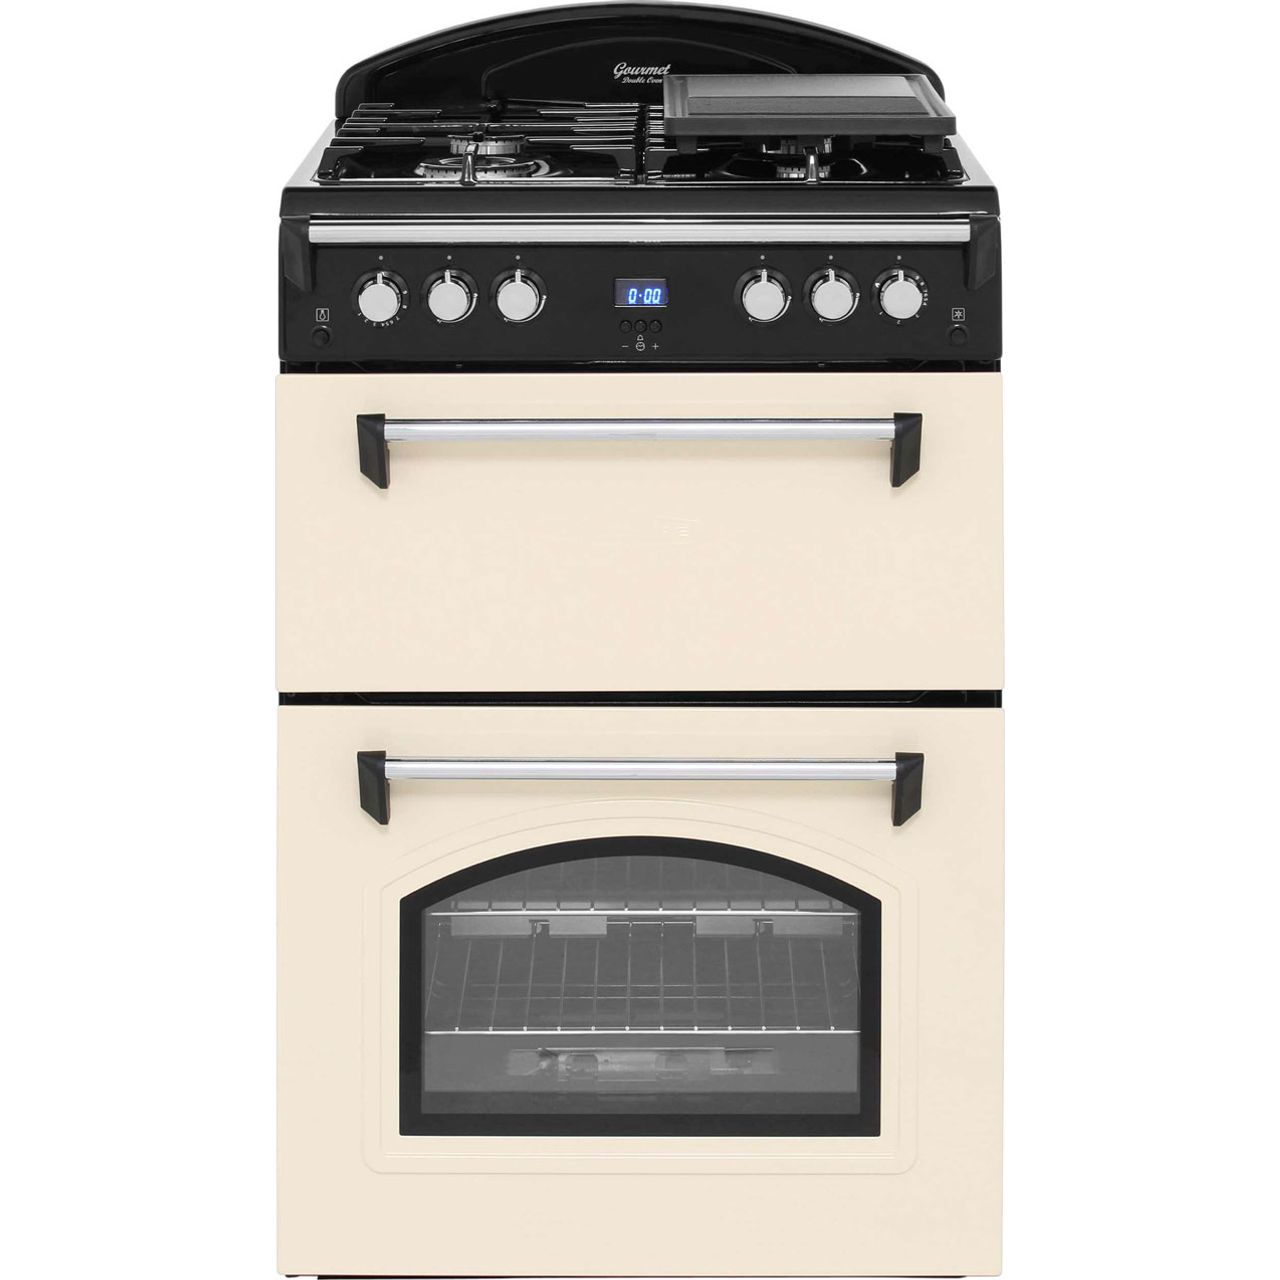 Leisure Gourmet GRB6GVC 60cm Gas Cooker with Full Width Gas Grill Review